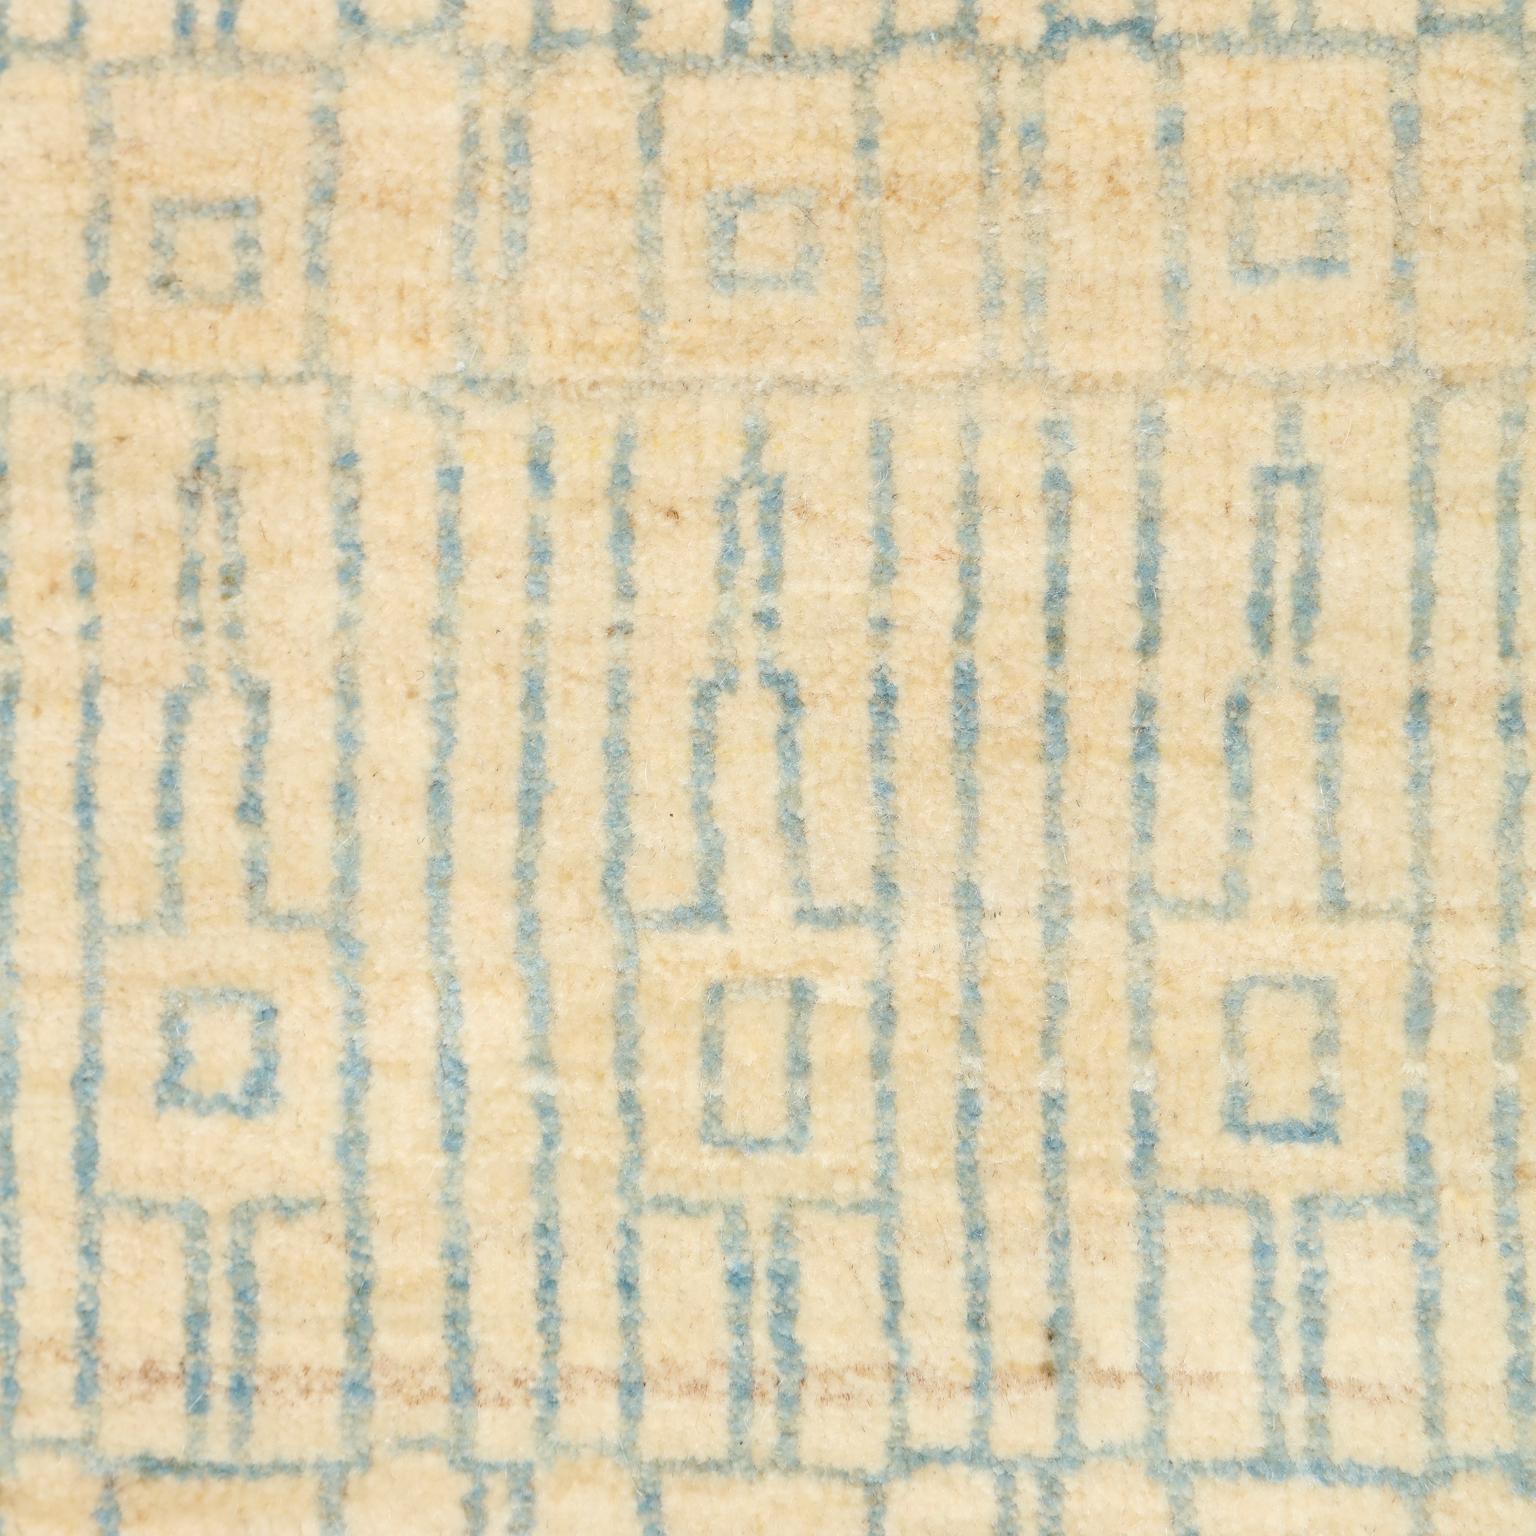 Orley Shabahang Contemporary Wool Persian Rug, Blue and Cream, 10' x 14' In New Condition For Sale In New York, NY